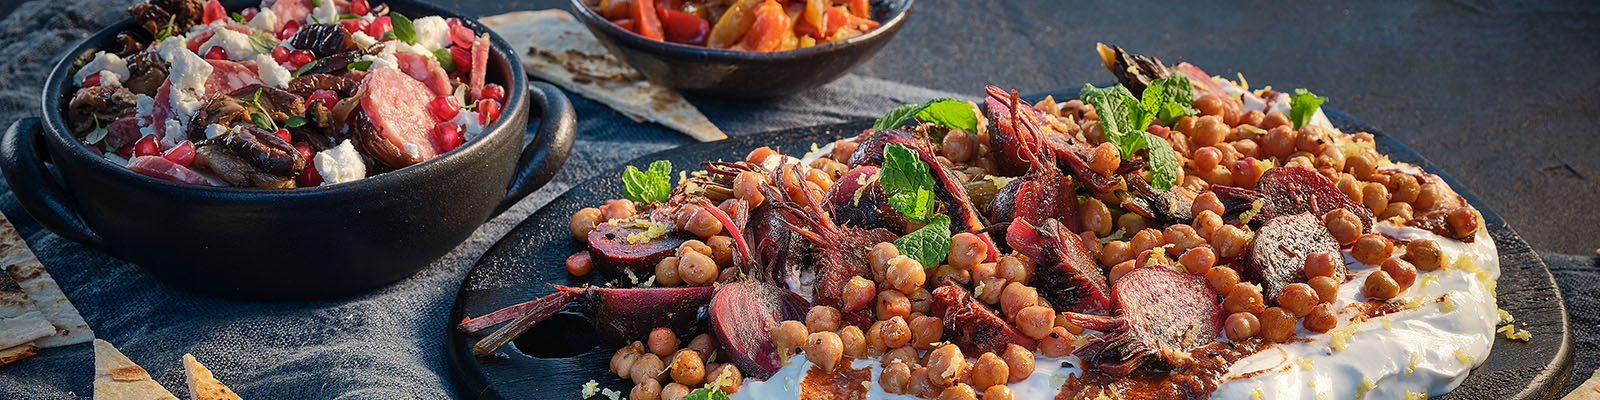 Neven Maguire's Mediterranean Mezze with Roasted Baby Beets with Chickpeas